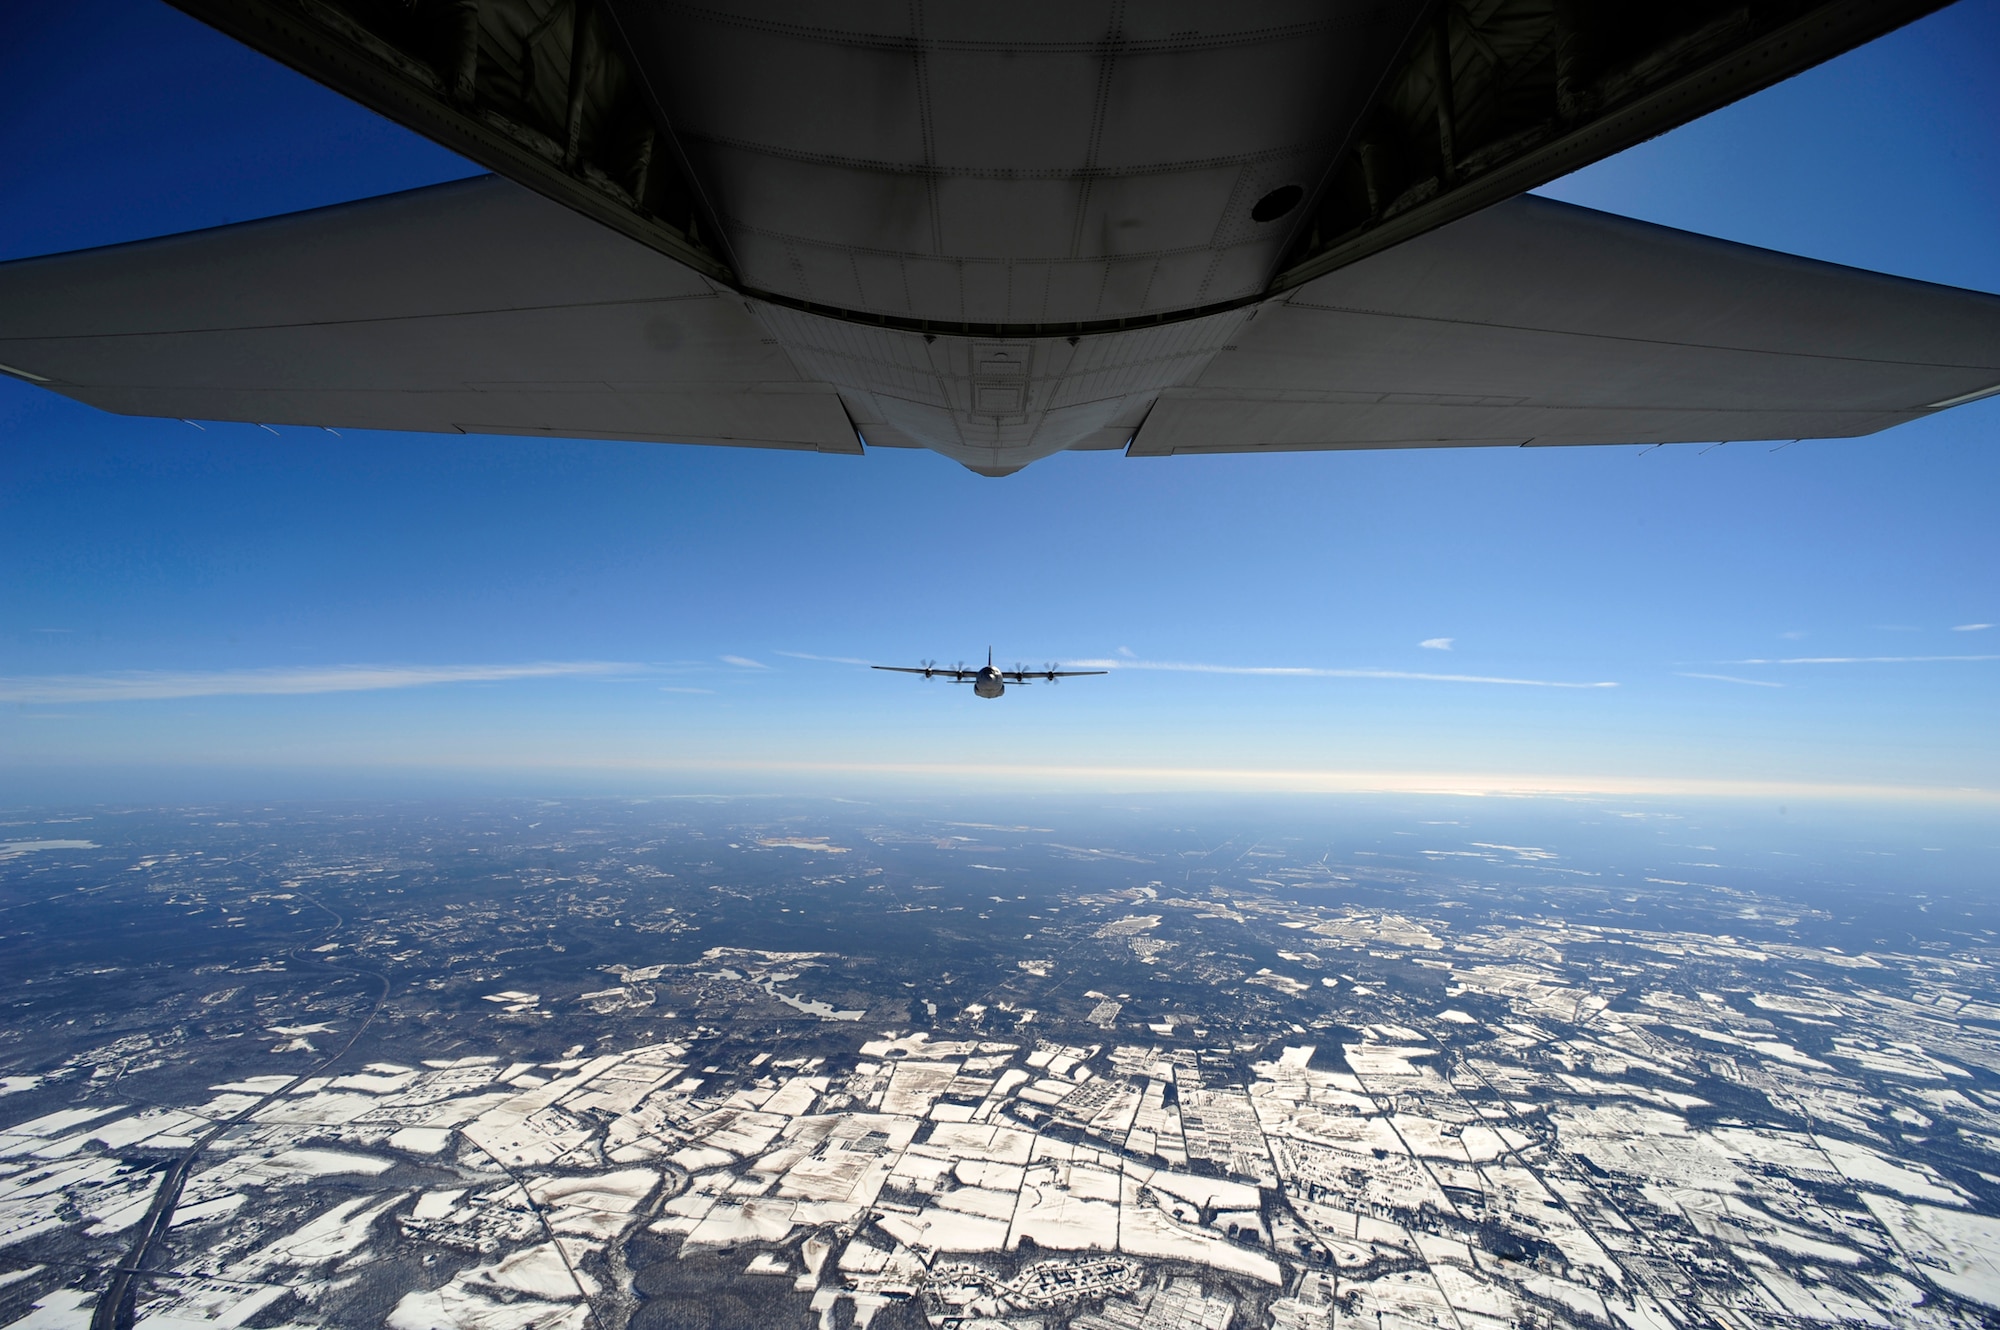 An EC-130J Commando Solo from the 193rd Special Operations Squadron flown by Air Force Special Operations Training Center students class 1101 flies in formation Feb. 11, 2011, over Harrisburg, Pa., during a training sortie. Class 1101 is the first group of students to attend mission qualification training for the EC-130J that will replace all the E- and P-model aircraft within the next few years. The EC-130J is equipped with modern avionics and mission systems. It is expected to provide specialized mobility to combatant commanders. (U.S. Air Force photo/Staff Sgt. Julianne M. Showalter) 